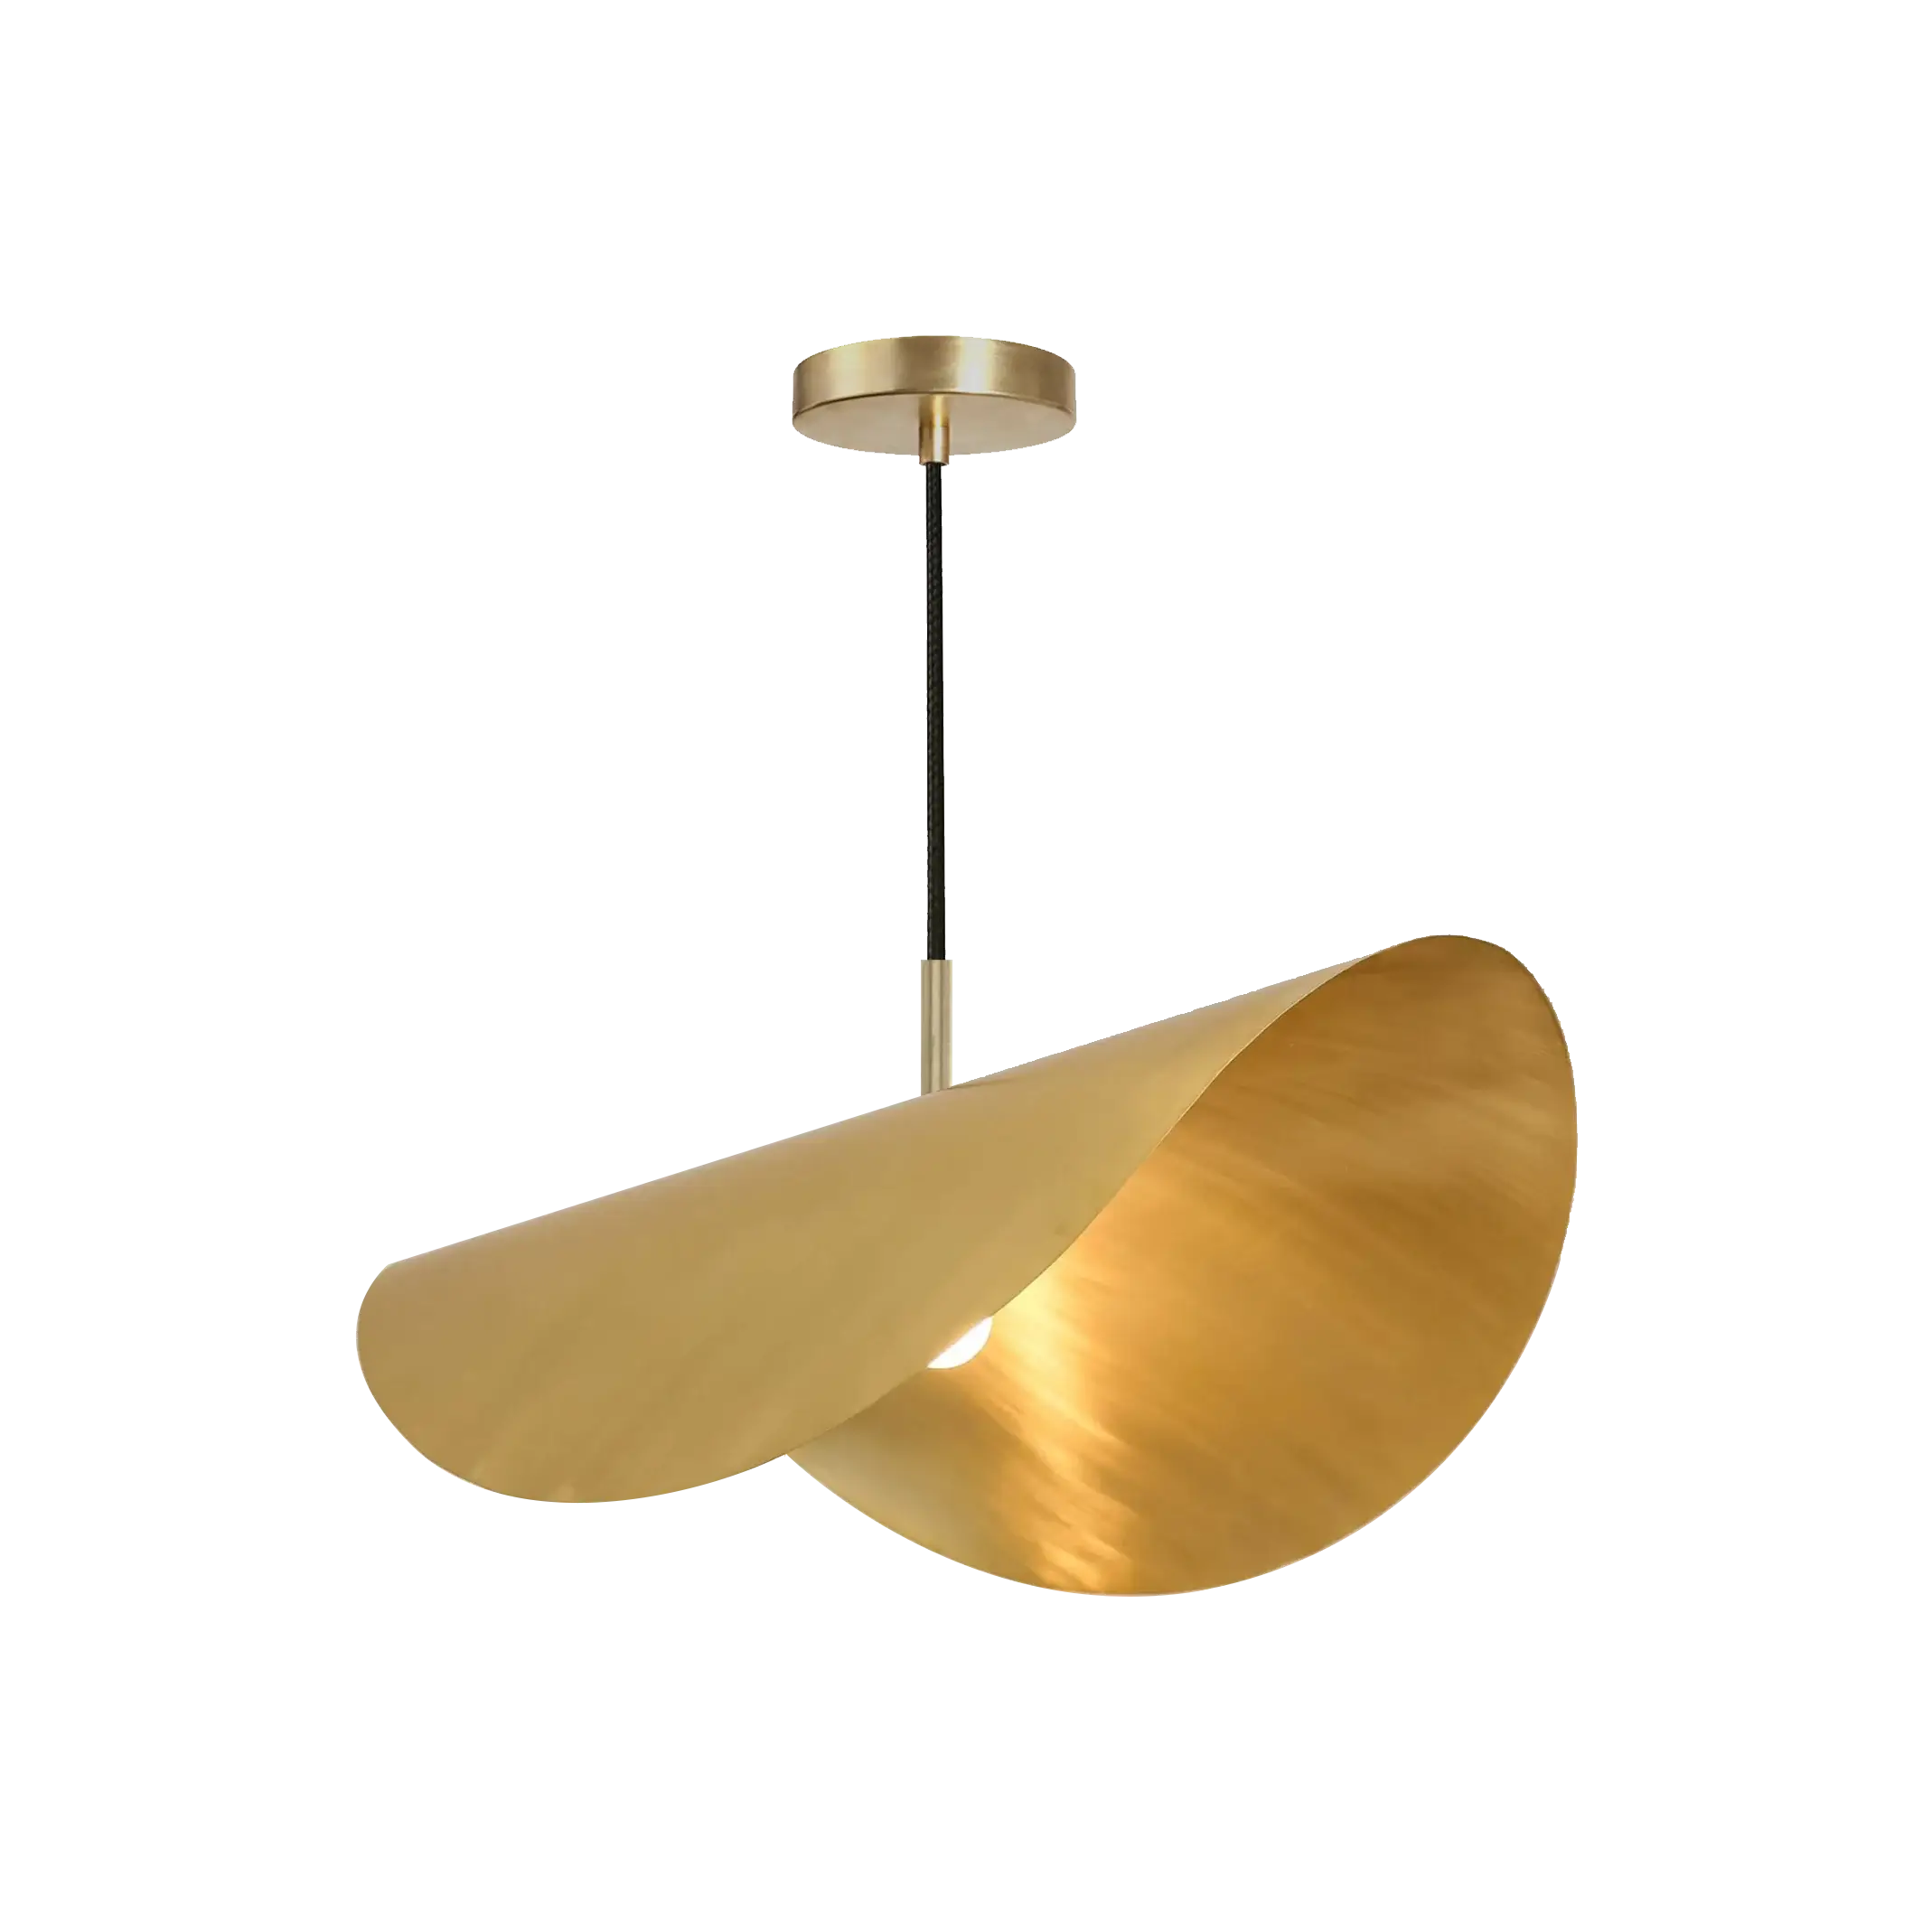 Dounia home Pendant light in Polished brass made of Metal, Model: moja